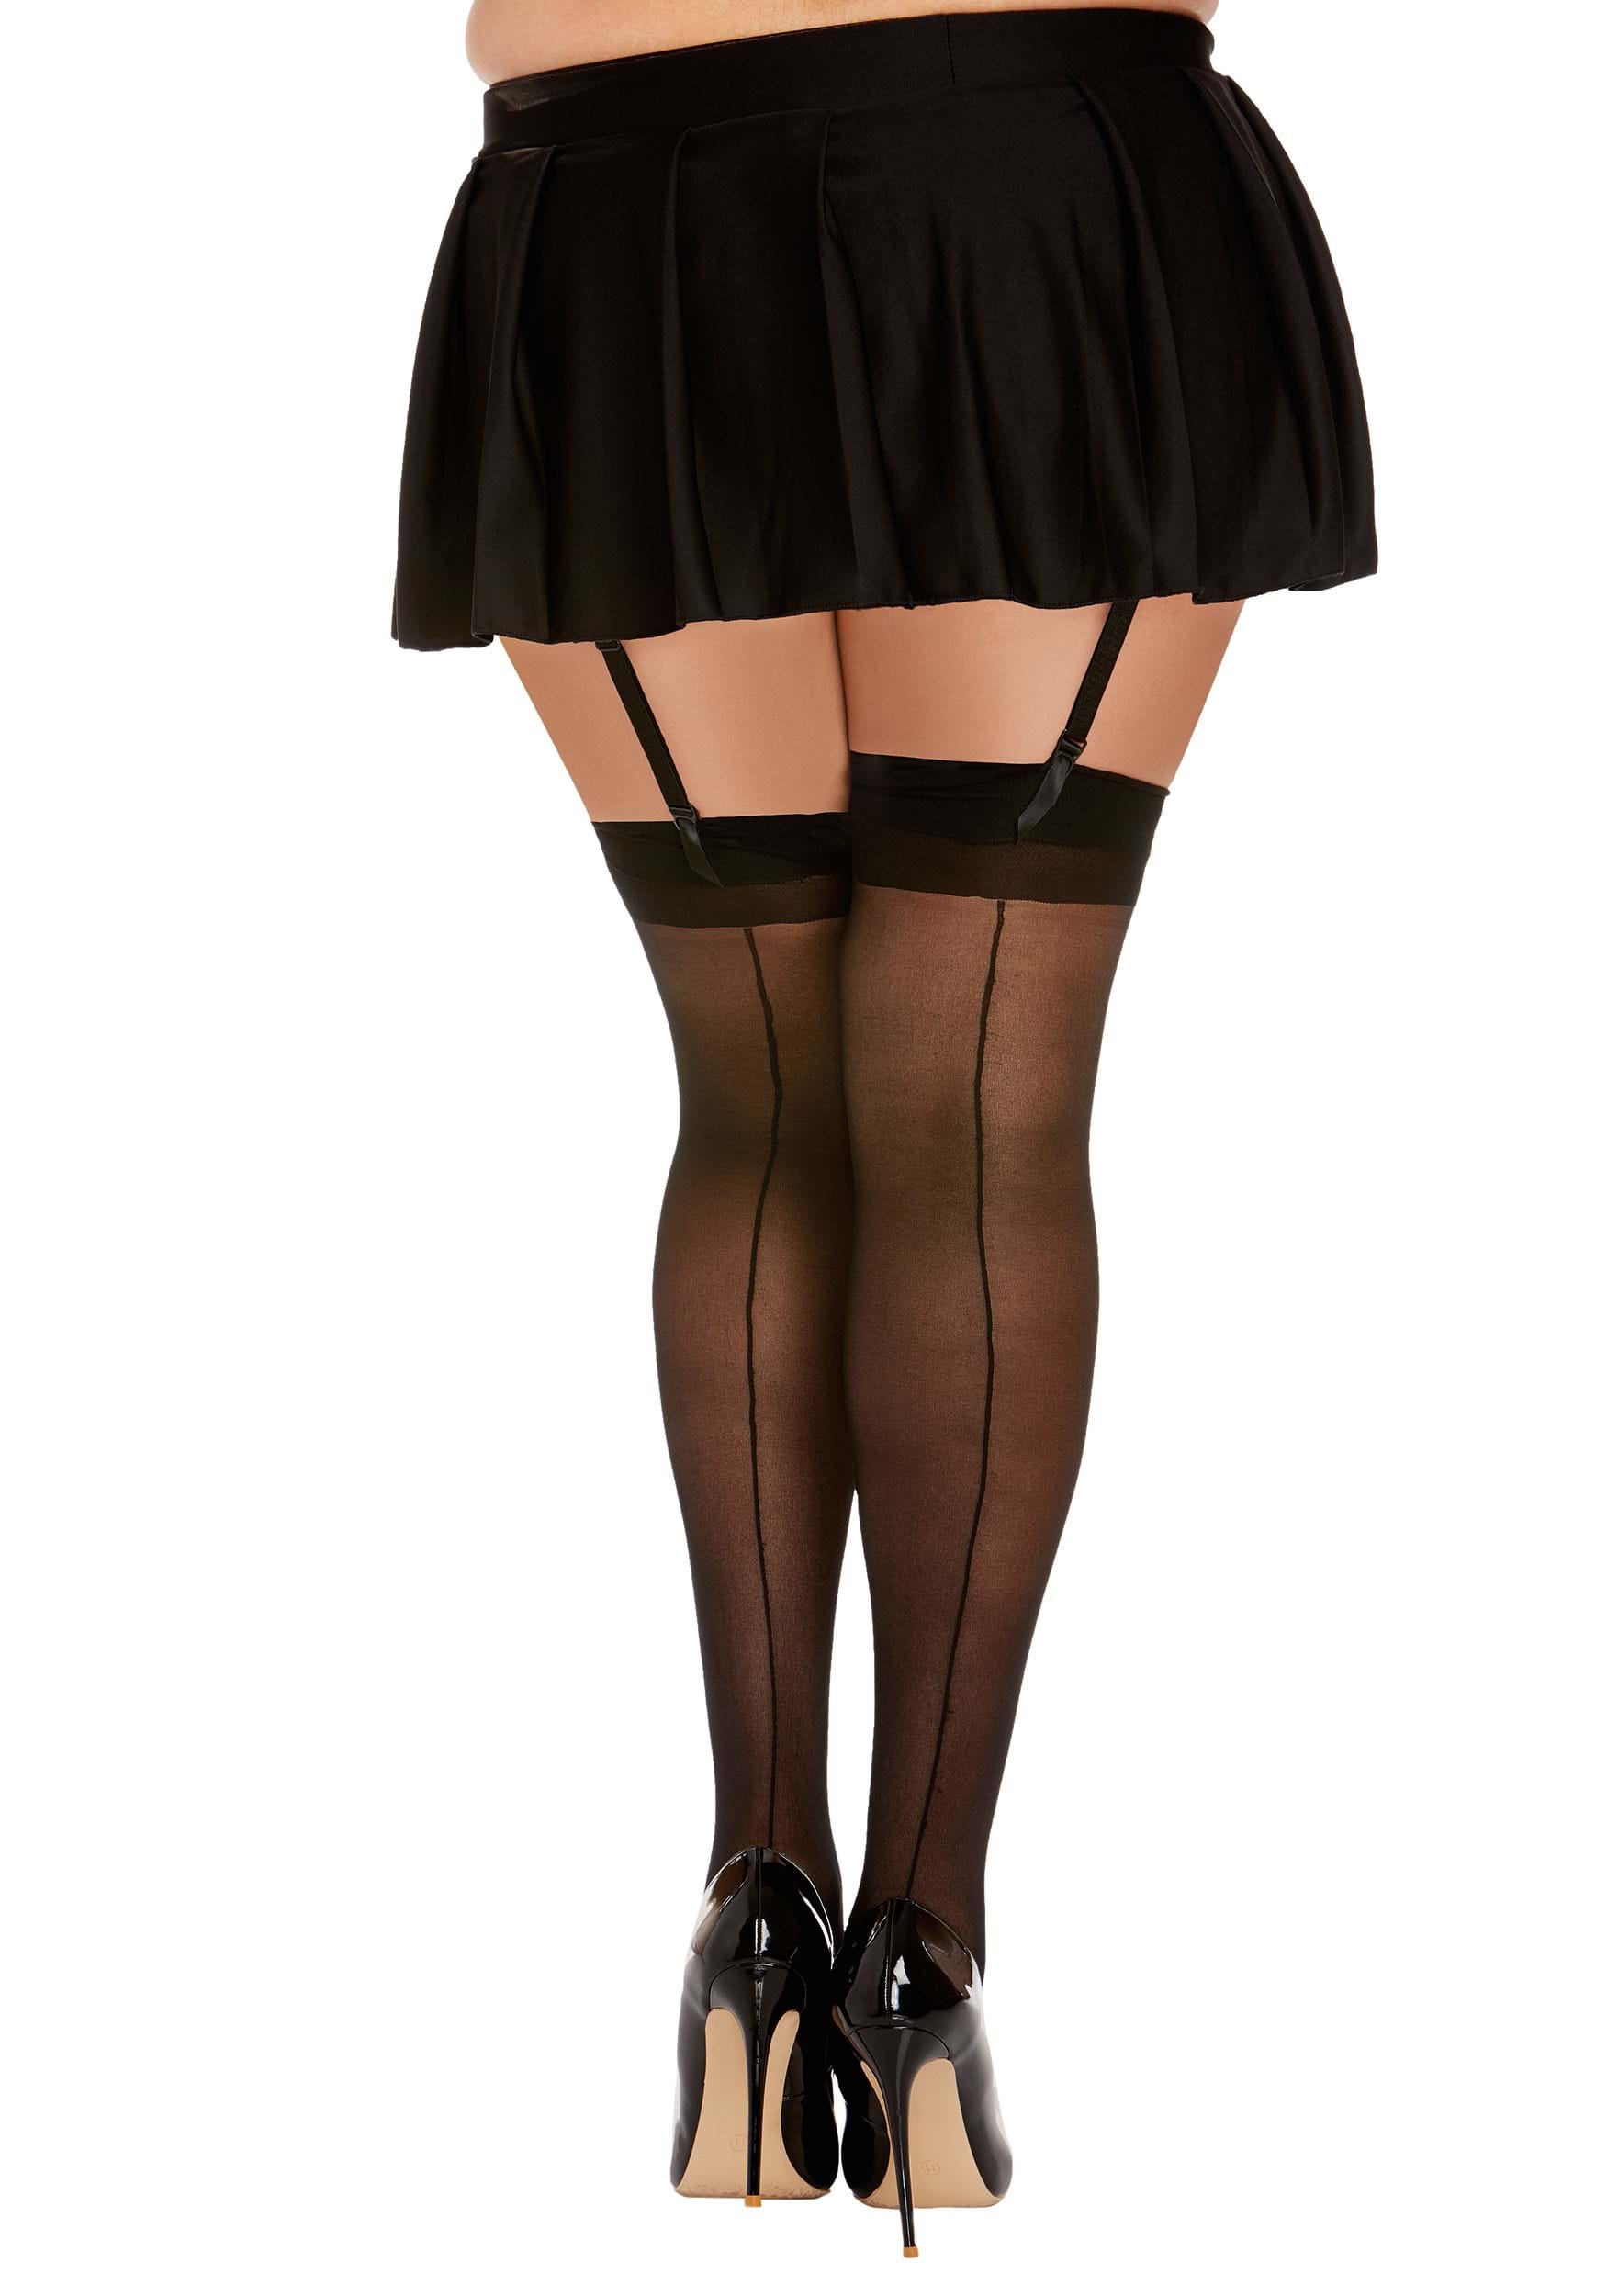 Plus Size Black Thigh High Stockings With Back Seam For Adults , Thigh High Tights